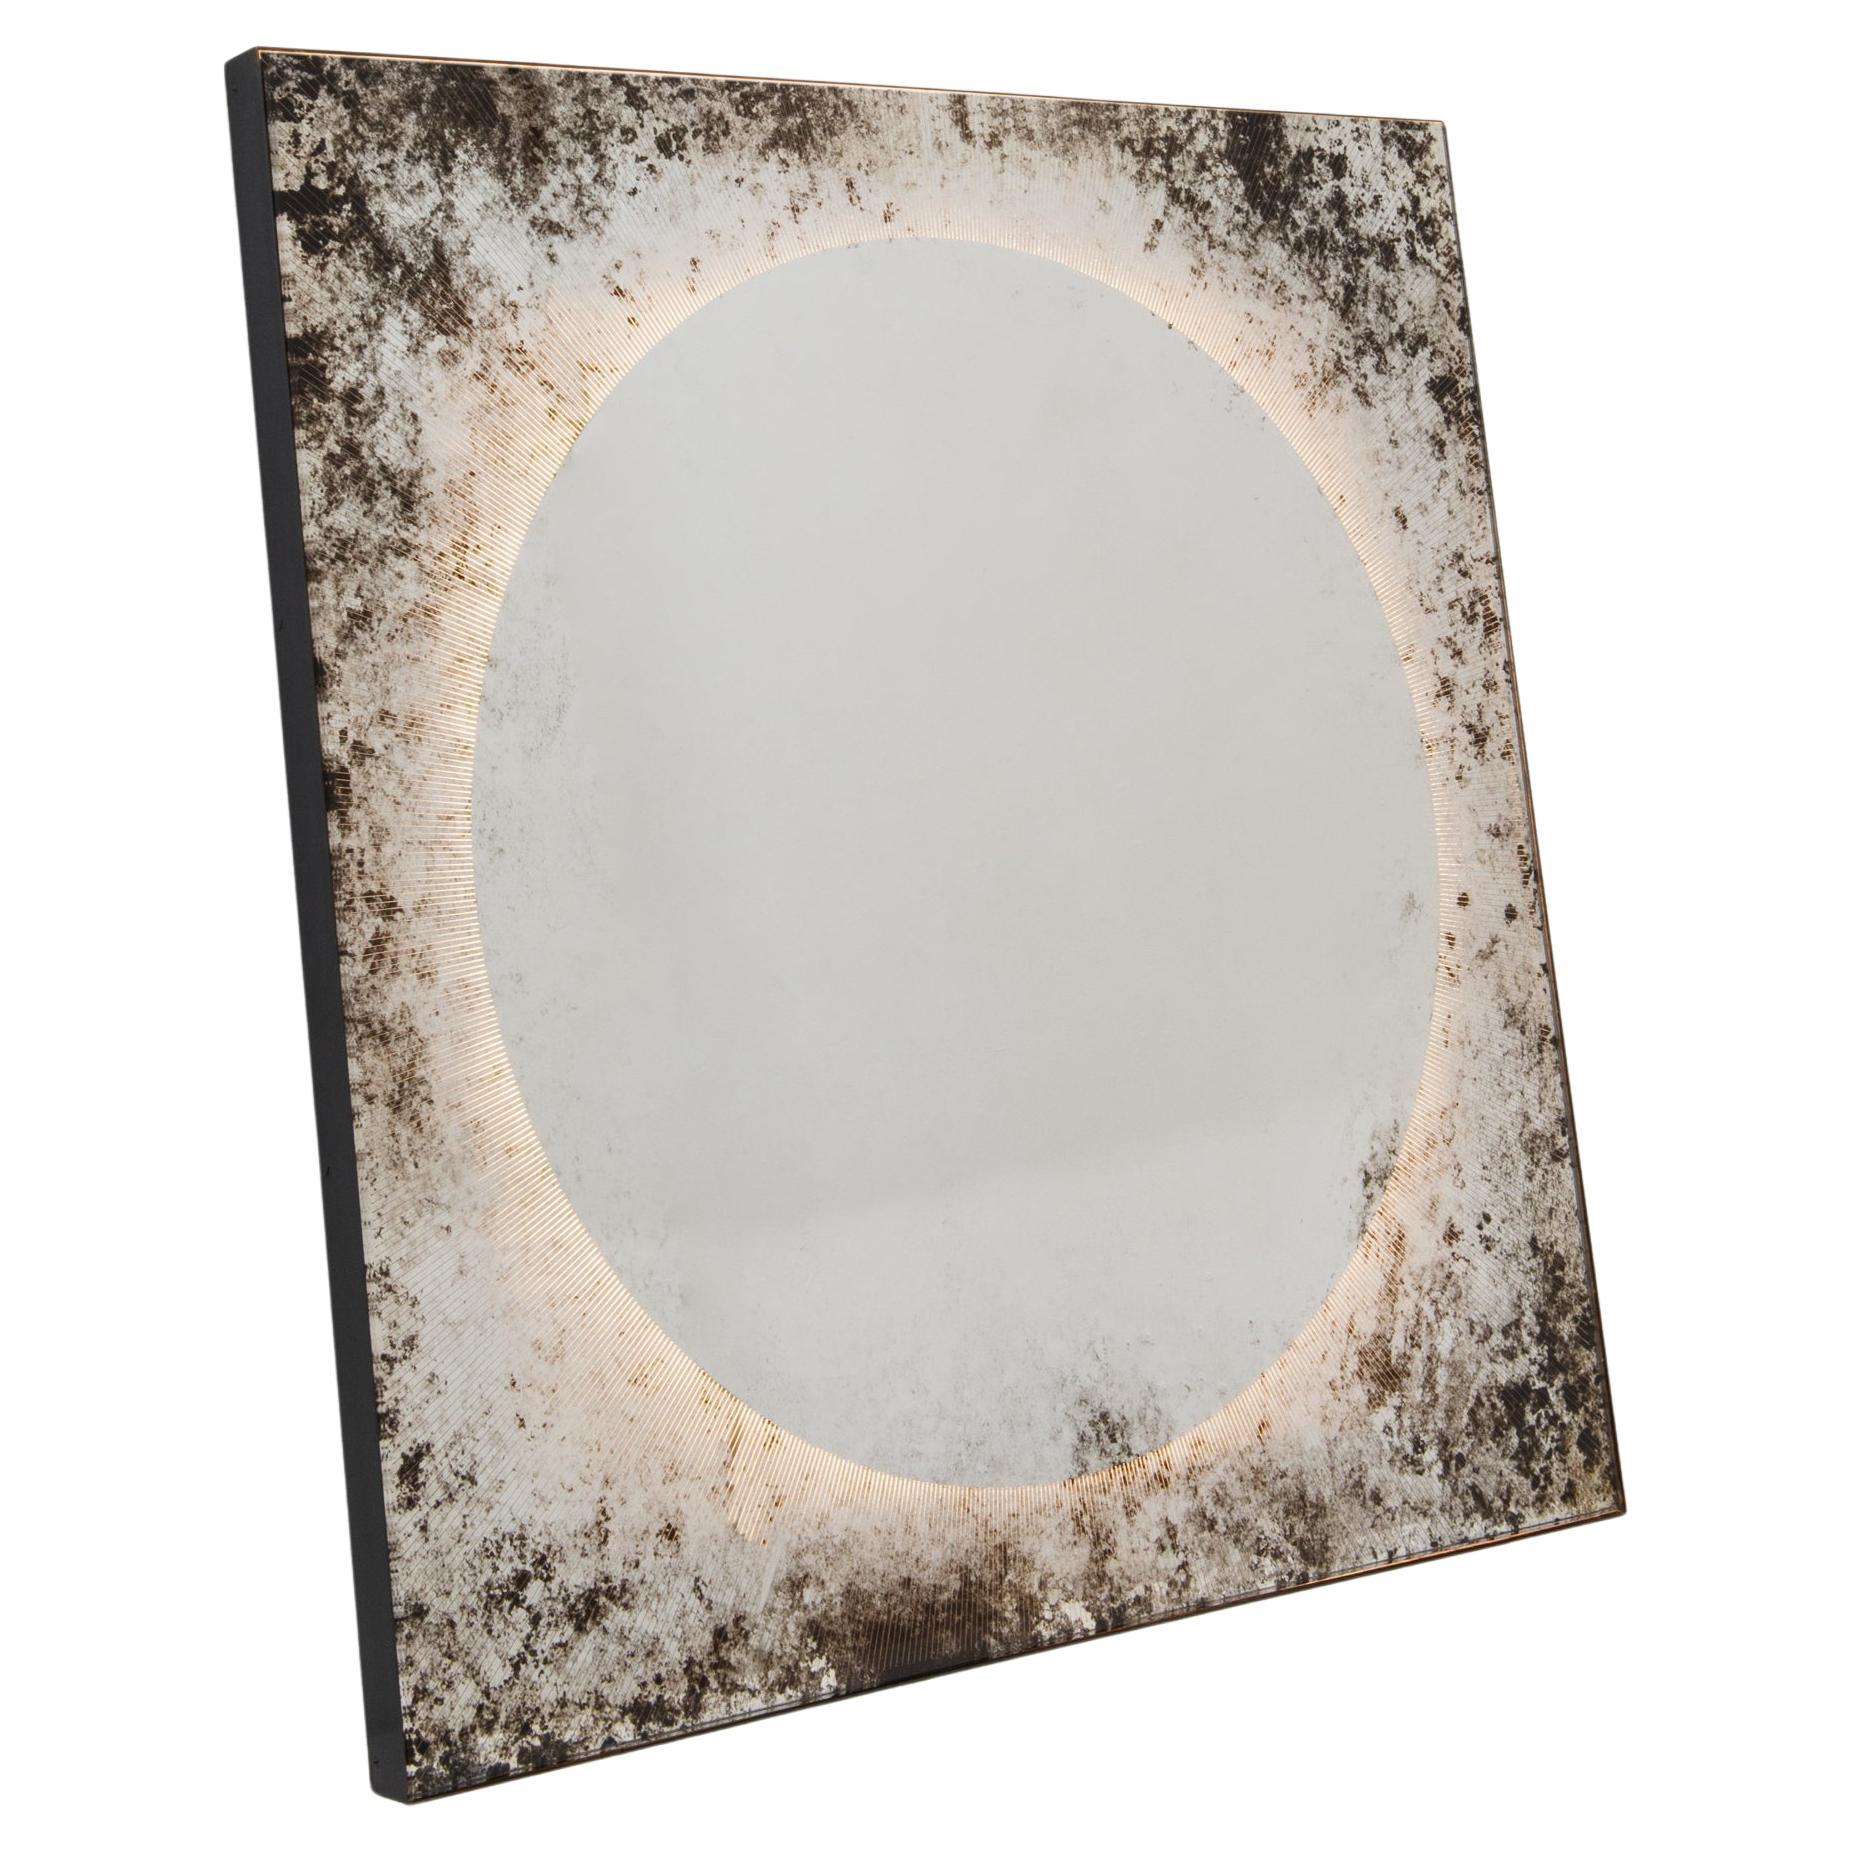 Sunrise Antiqued Finely Etched Mirror, Back-Illuminated, Blackened Metal For Sale